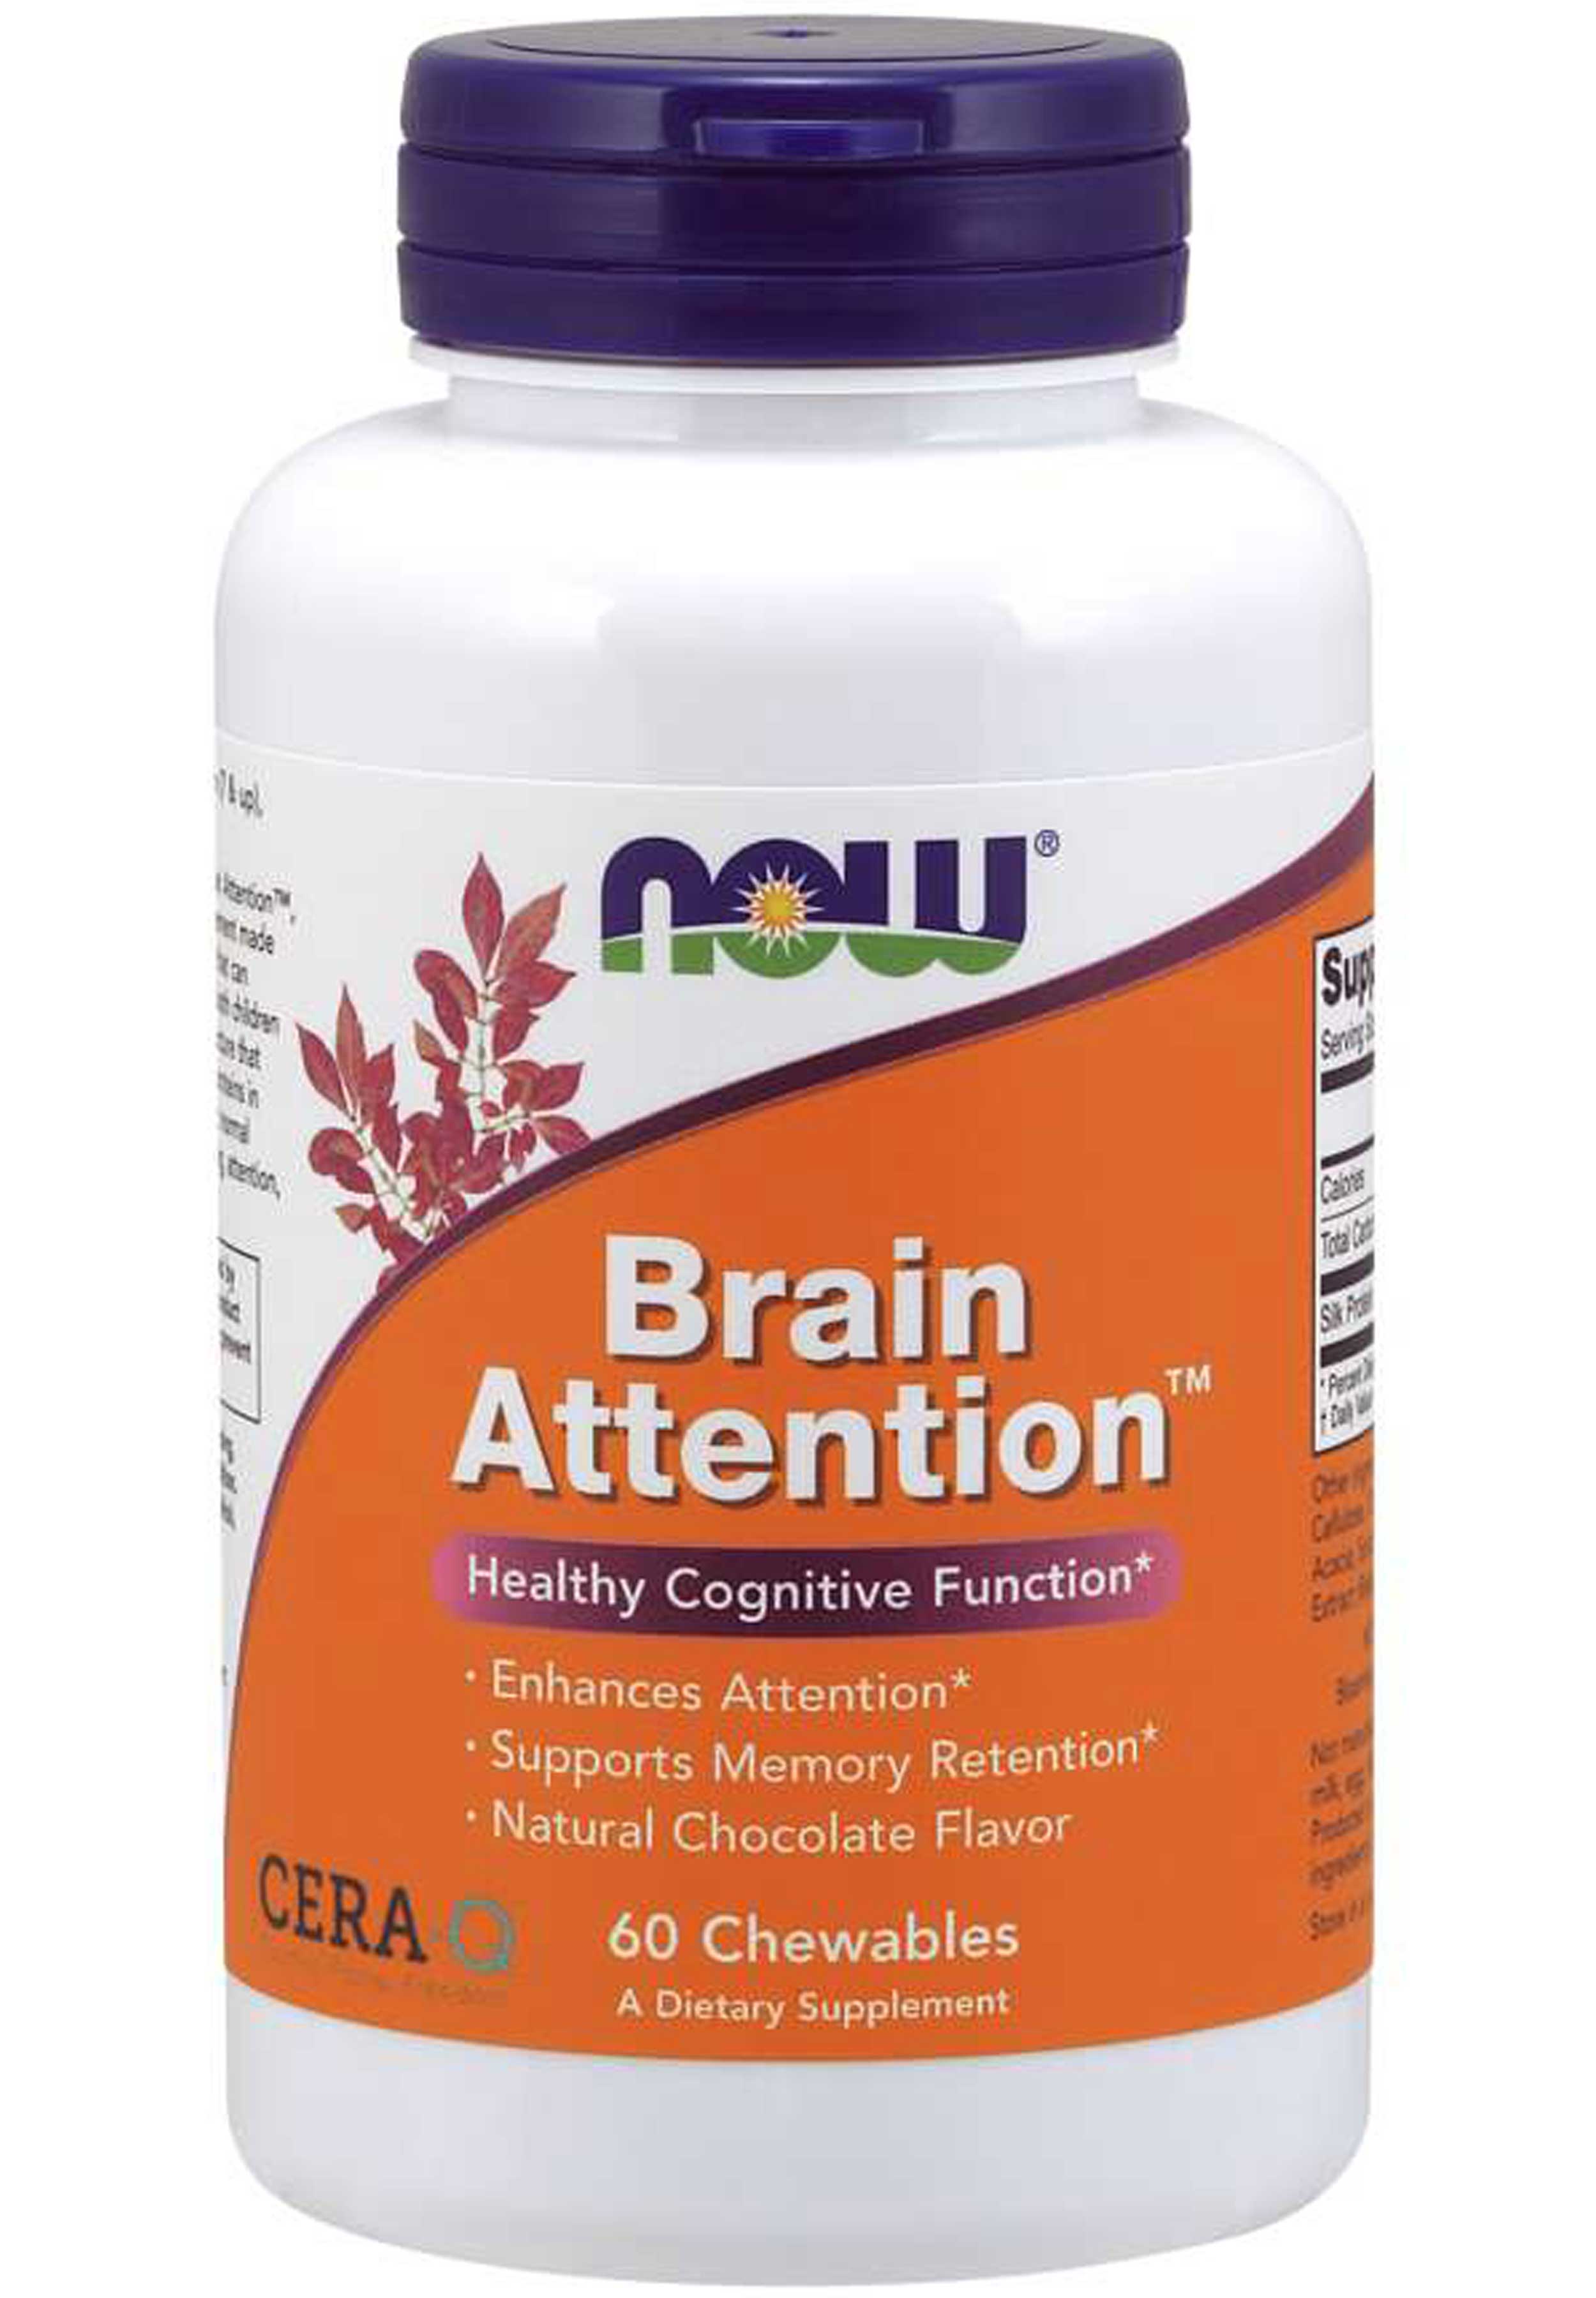 NOW Brain Attention